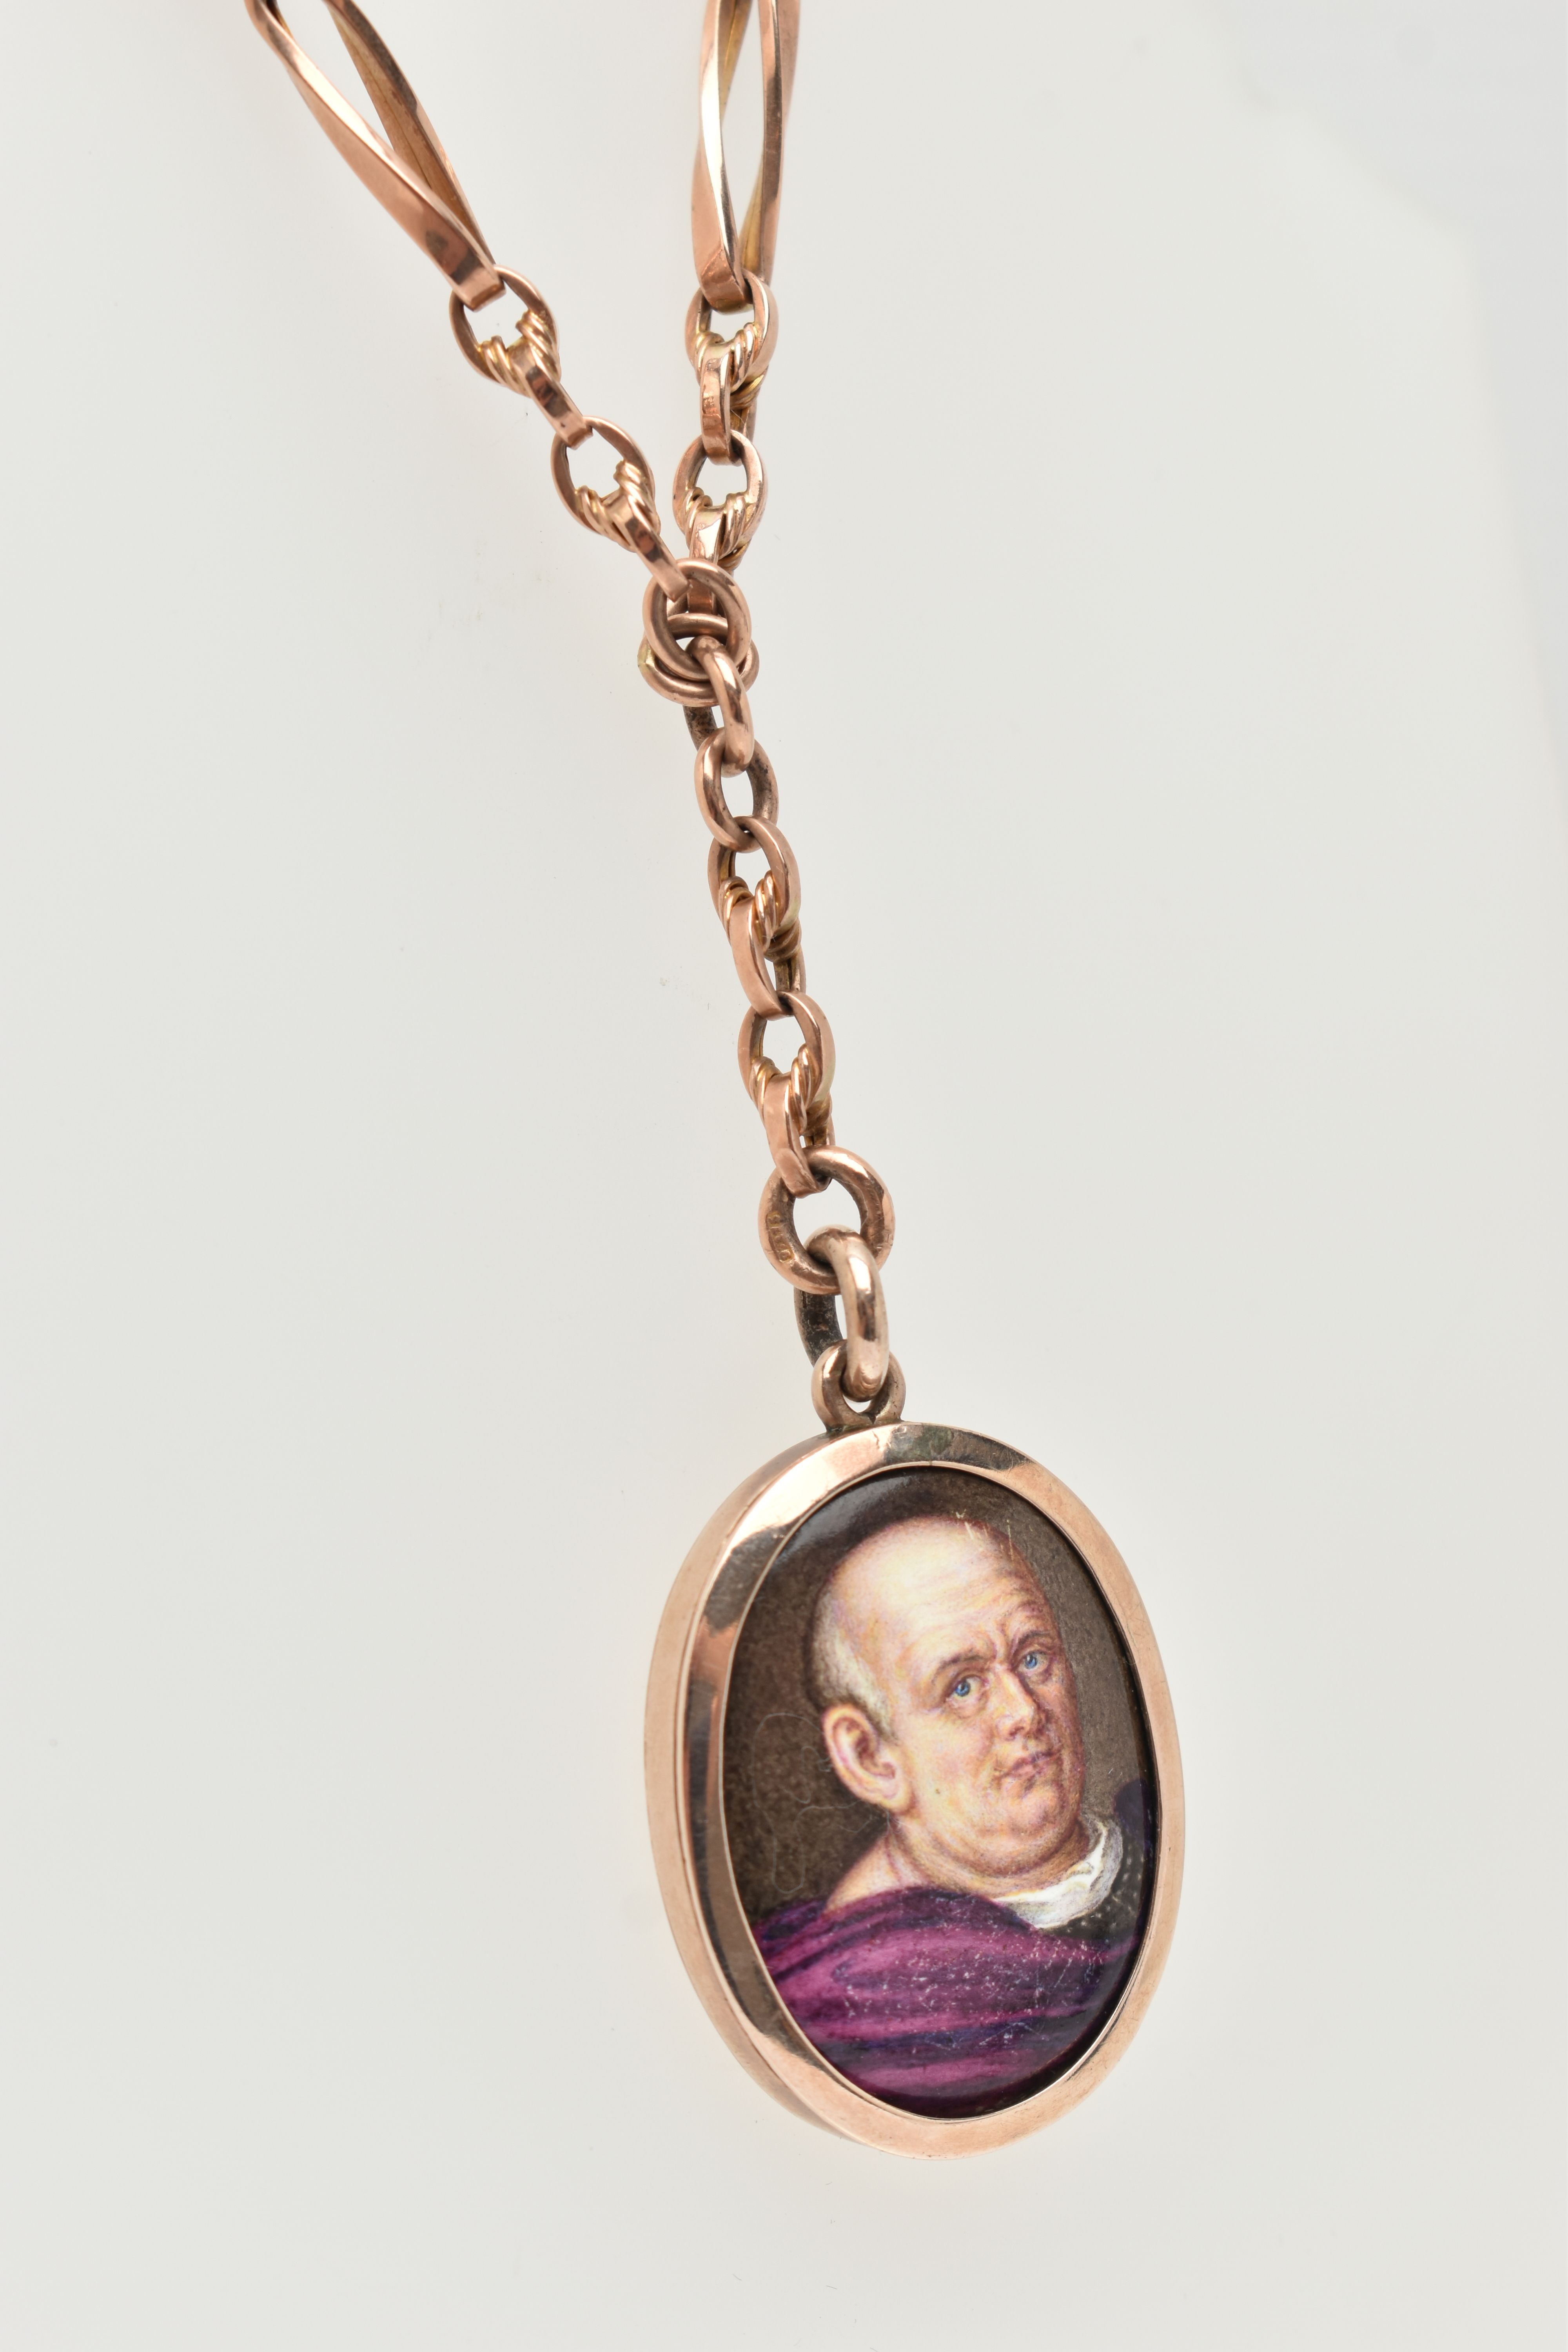 AN EARLY 20TH CENTURY MINIATURE PORTRAIT PENDANT AND CHAIN, the oval enamel pendant depicting a - Image 4 of 7